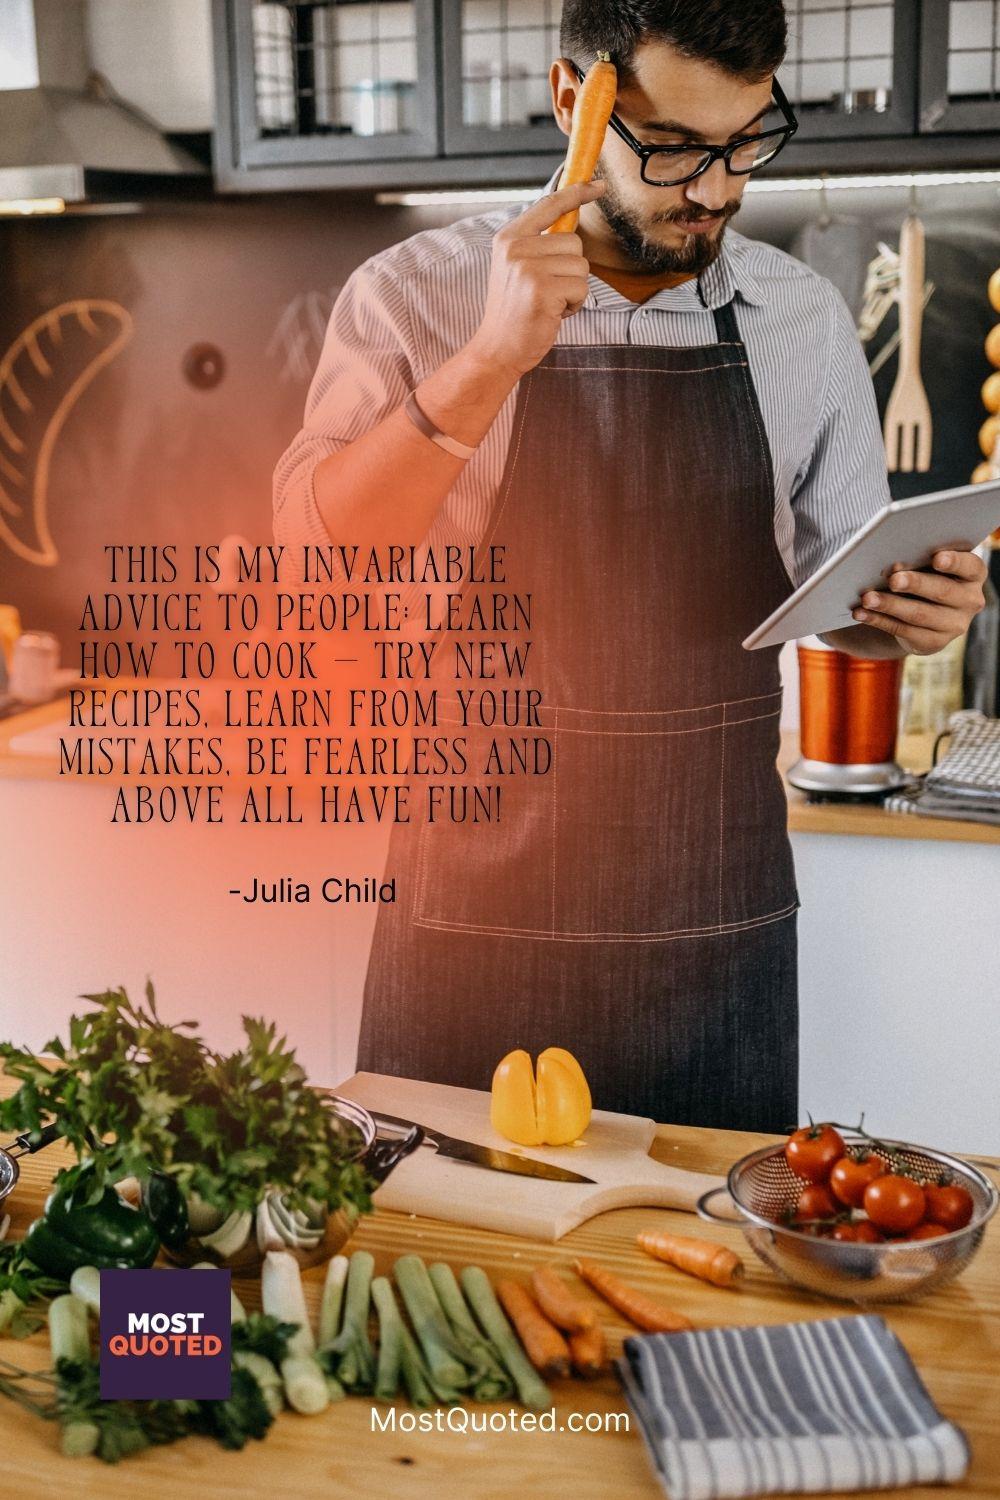 This is my invariable advice to people: Learn how to cook — try new recipes, learn from your mistakes, be fearless and above all have fun! - Julia Child